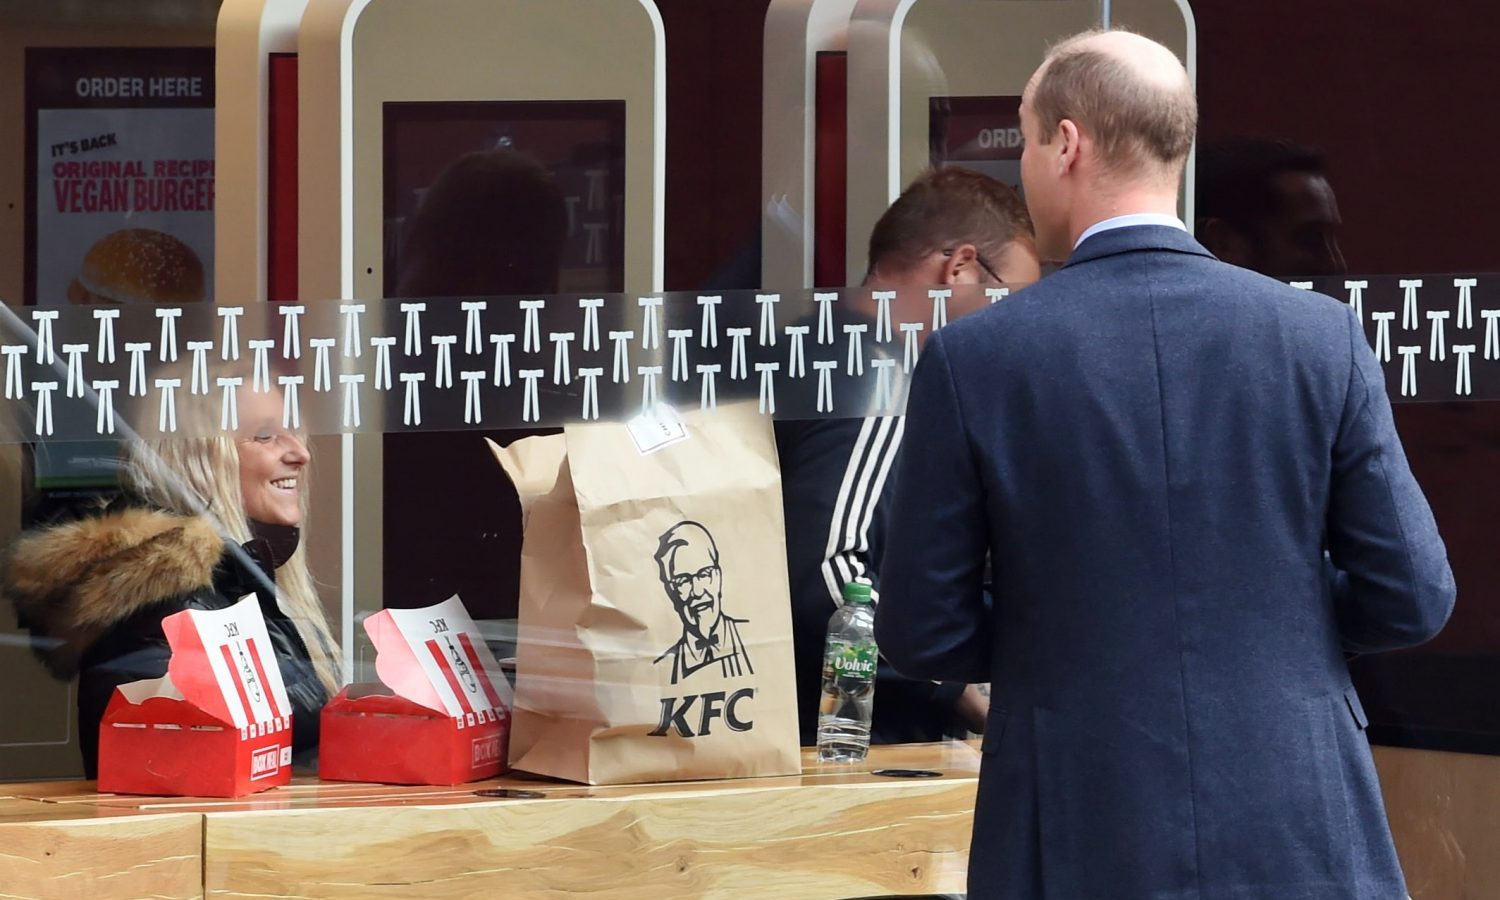 Prince William's New Royal Title Is A Nod To His Thirst For KFC